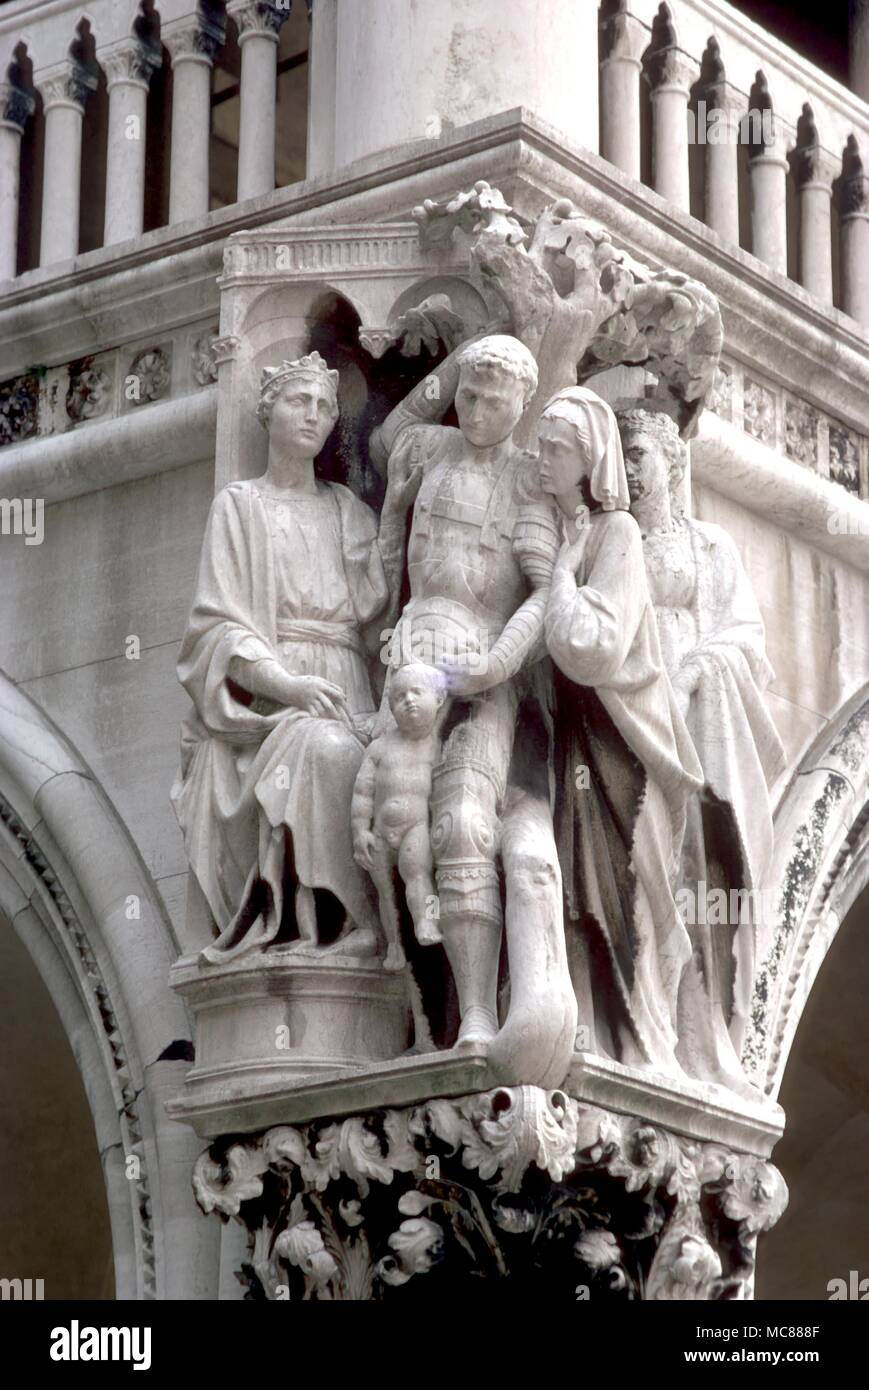 CHRISTIAN The Judgement of Solomon - statues in Venice. Photo credit: Philip Daly Stock Photo